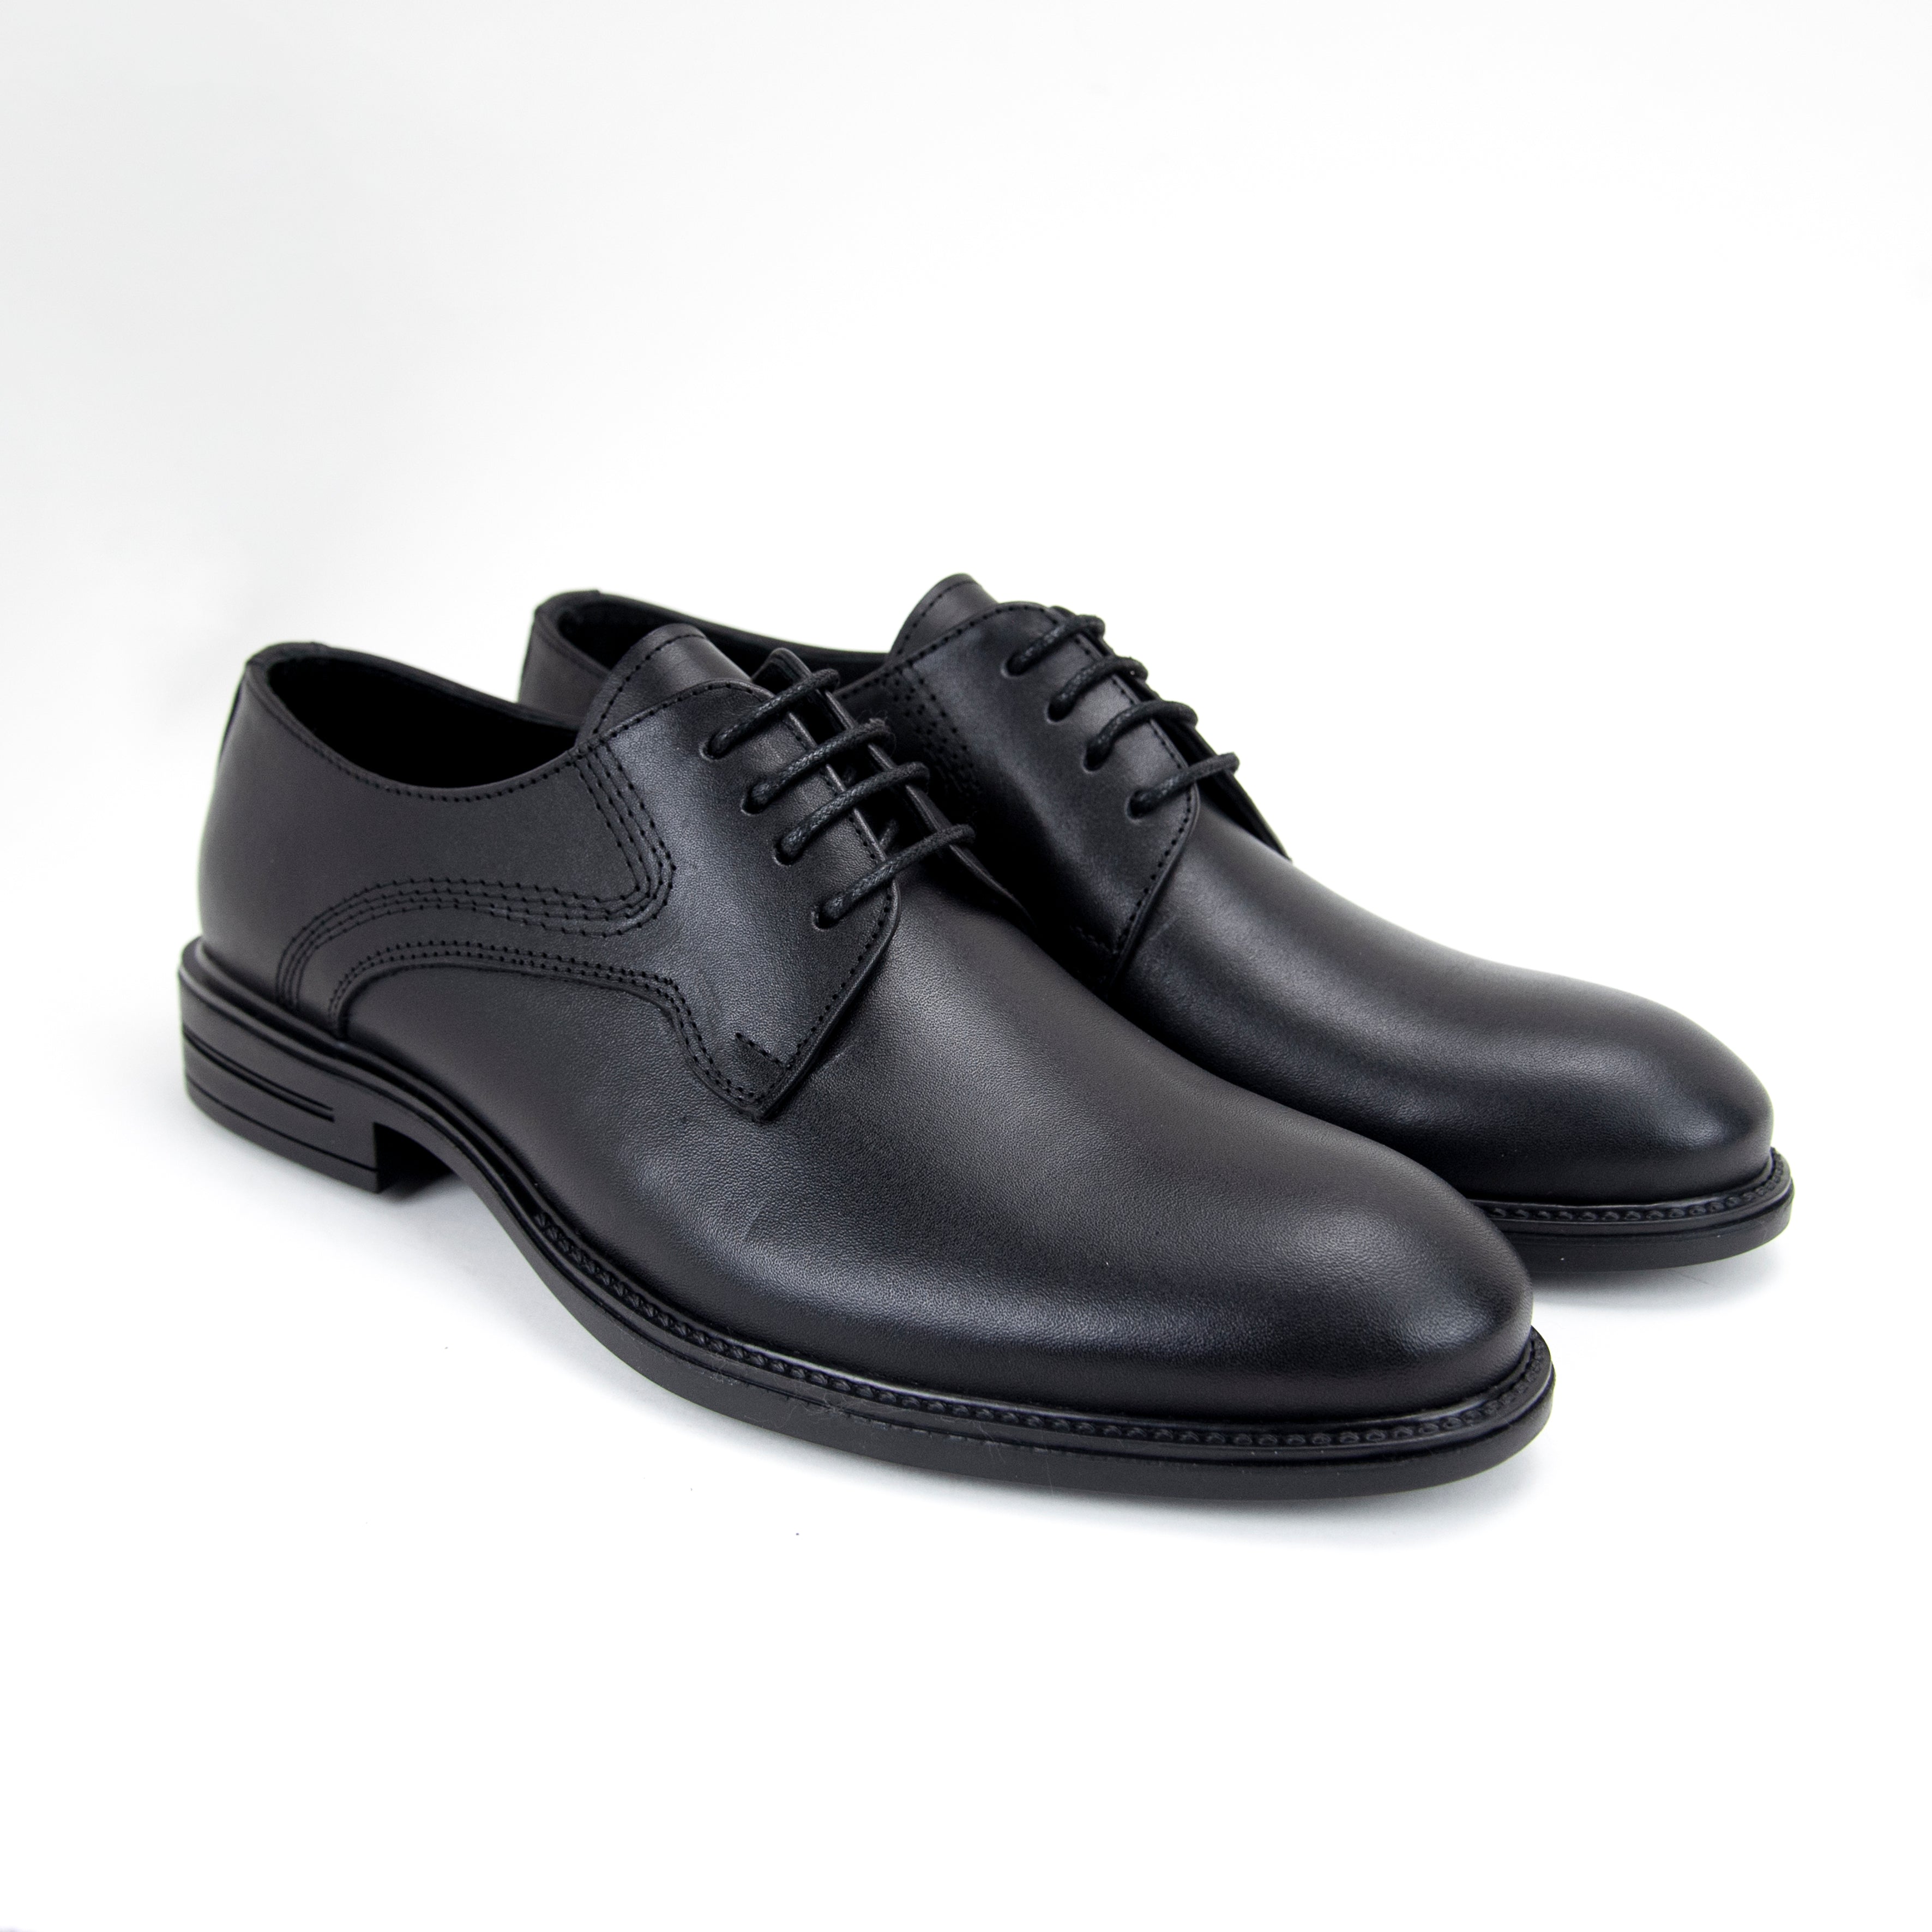 Dorano 2 - Leather Derby dress shoes (signature)